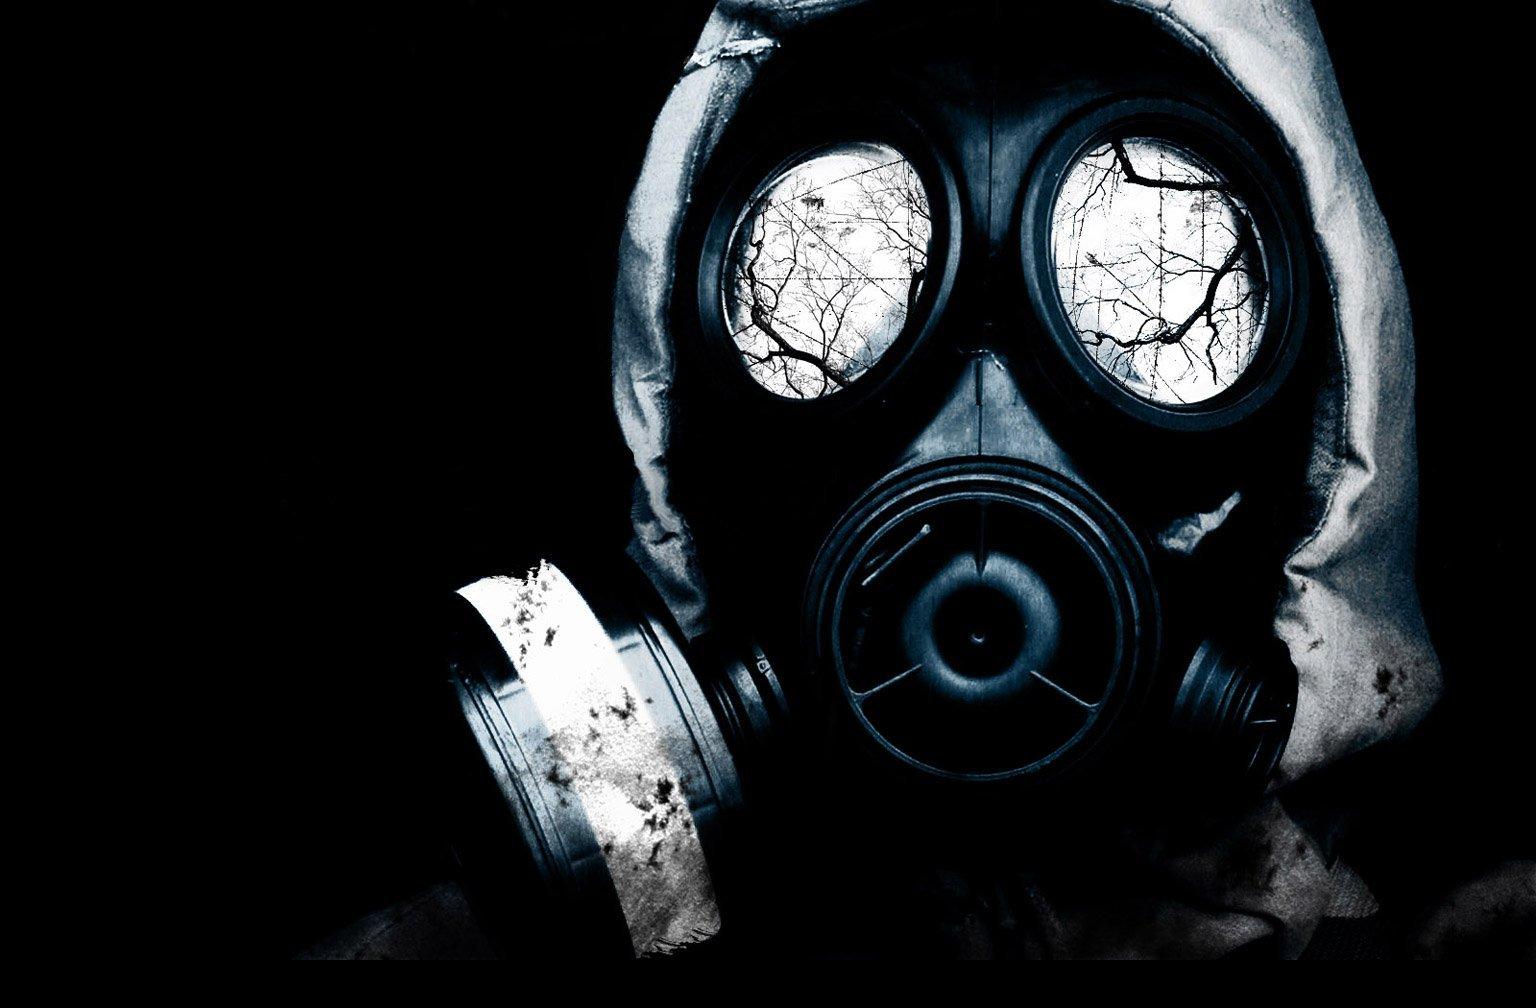 gas mask wallpaper,mask,gas mask,personal protective equipment,clothing,costume